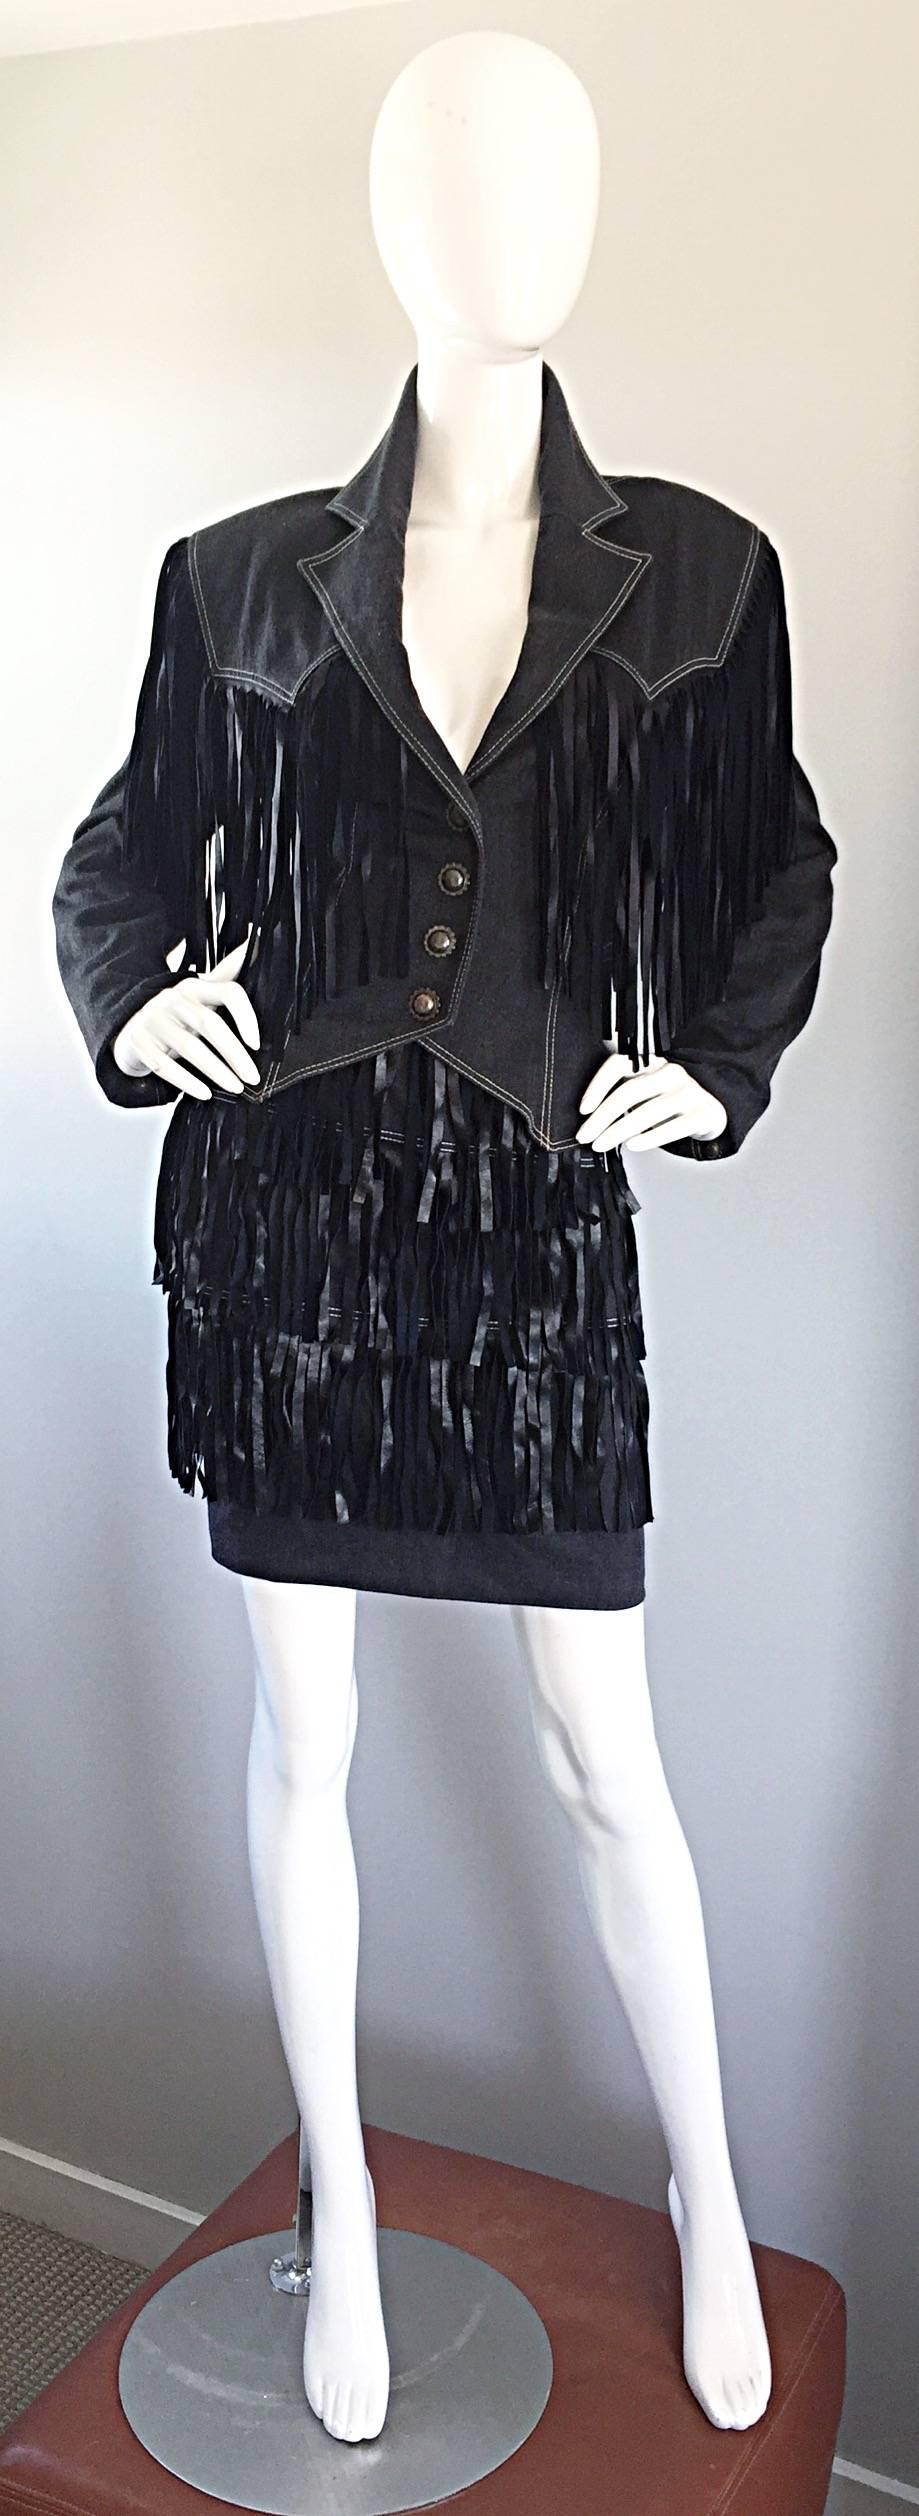 Fantastic and rare vintage PATRICK KELLY denim and leather Western inspired fringed jacket and skirt suit set! Tailored fitted denim jacket with black leather fringe hand-sewn onto the front and back. Perfect high waisted fitted denim skirt, with